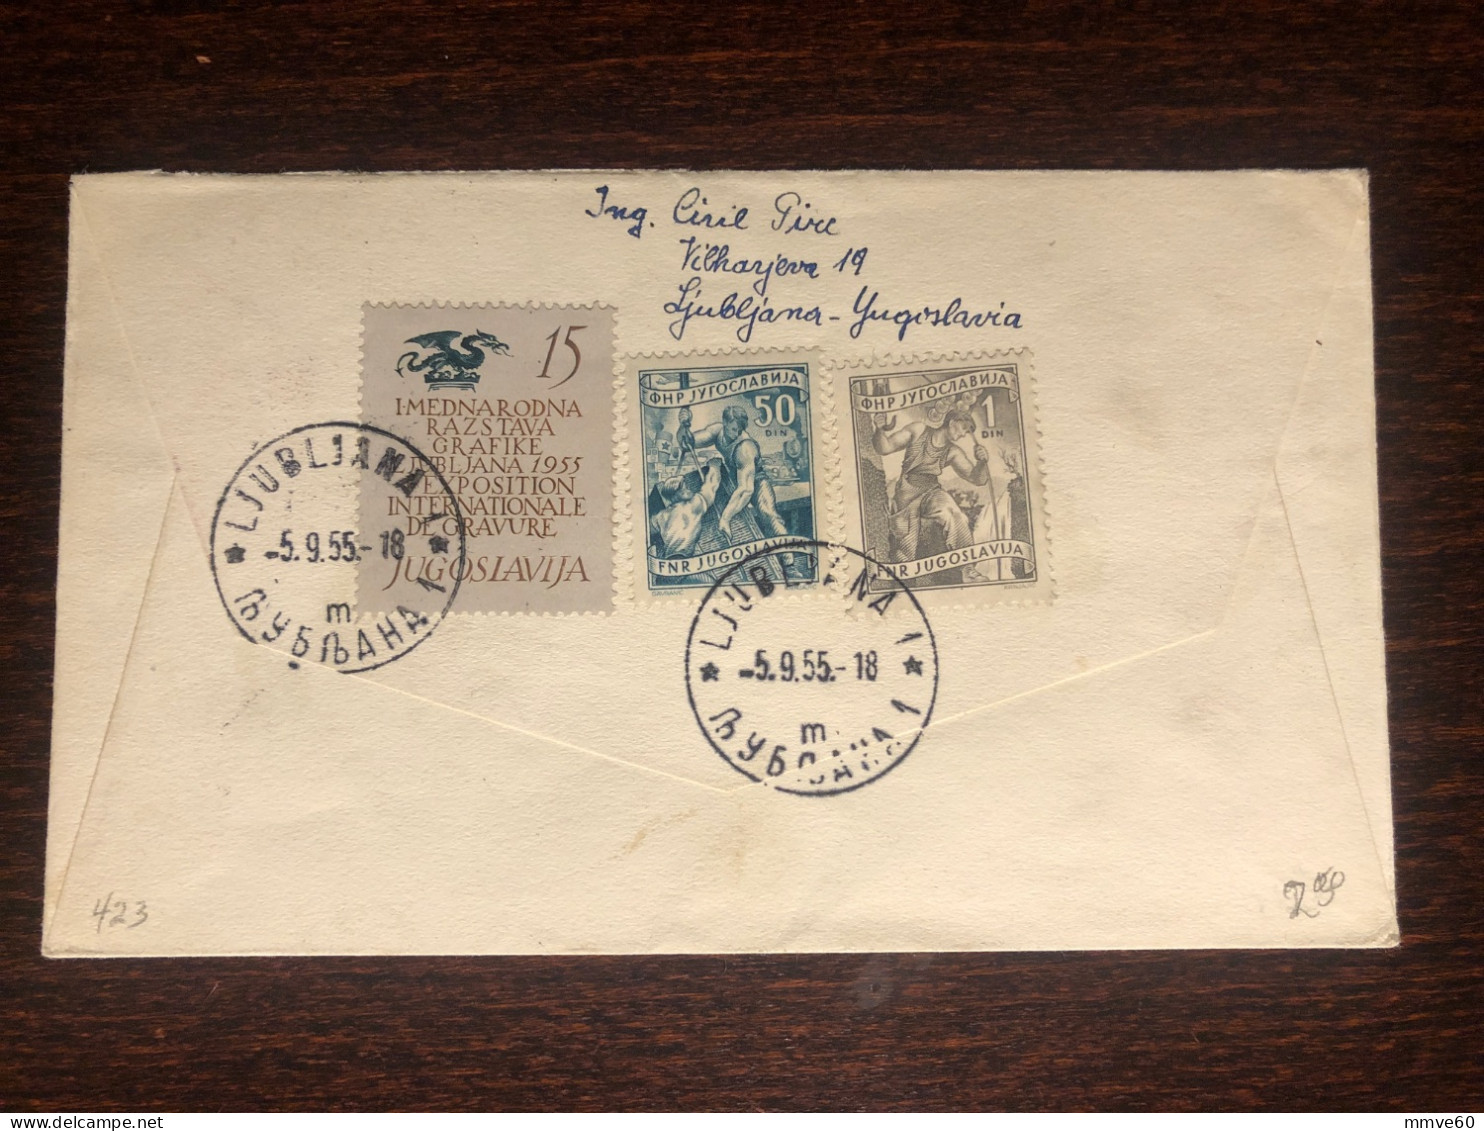 YUGOSLAVIA FDC COVER 1955 YEAR DEAF STUDY CONGRESS HEALTH MEDICINE STAMPS - FDC